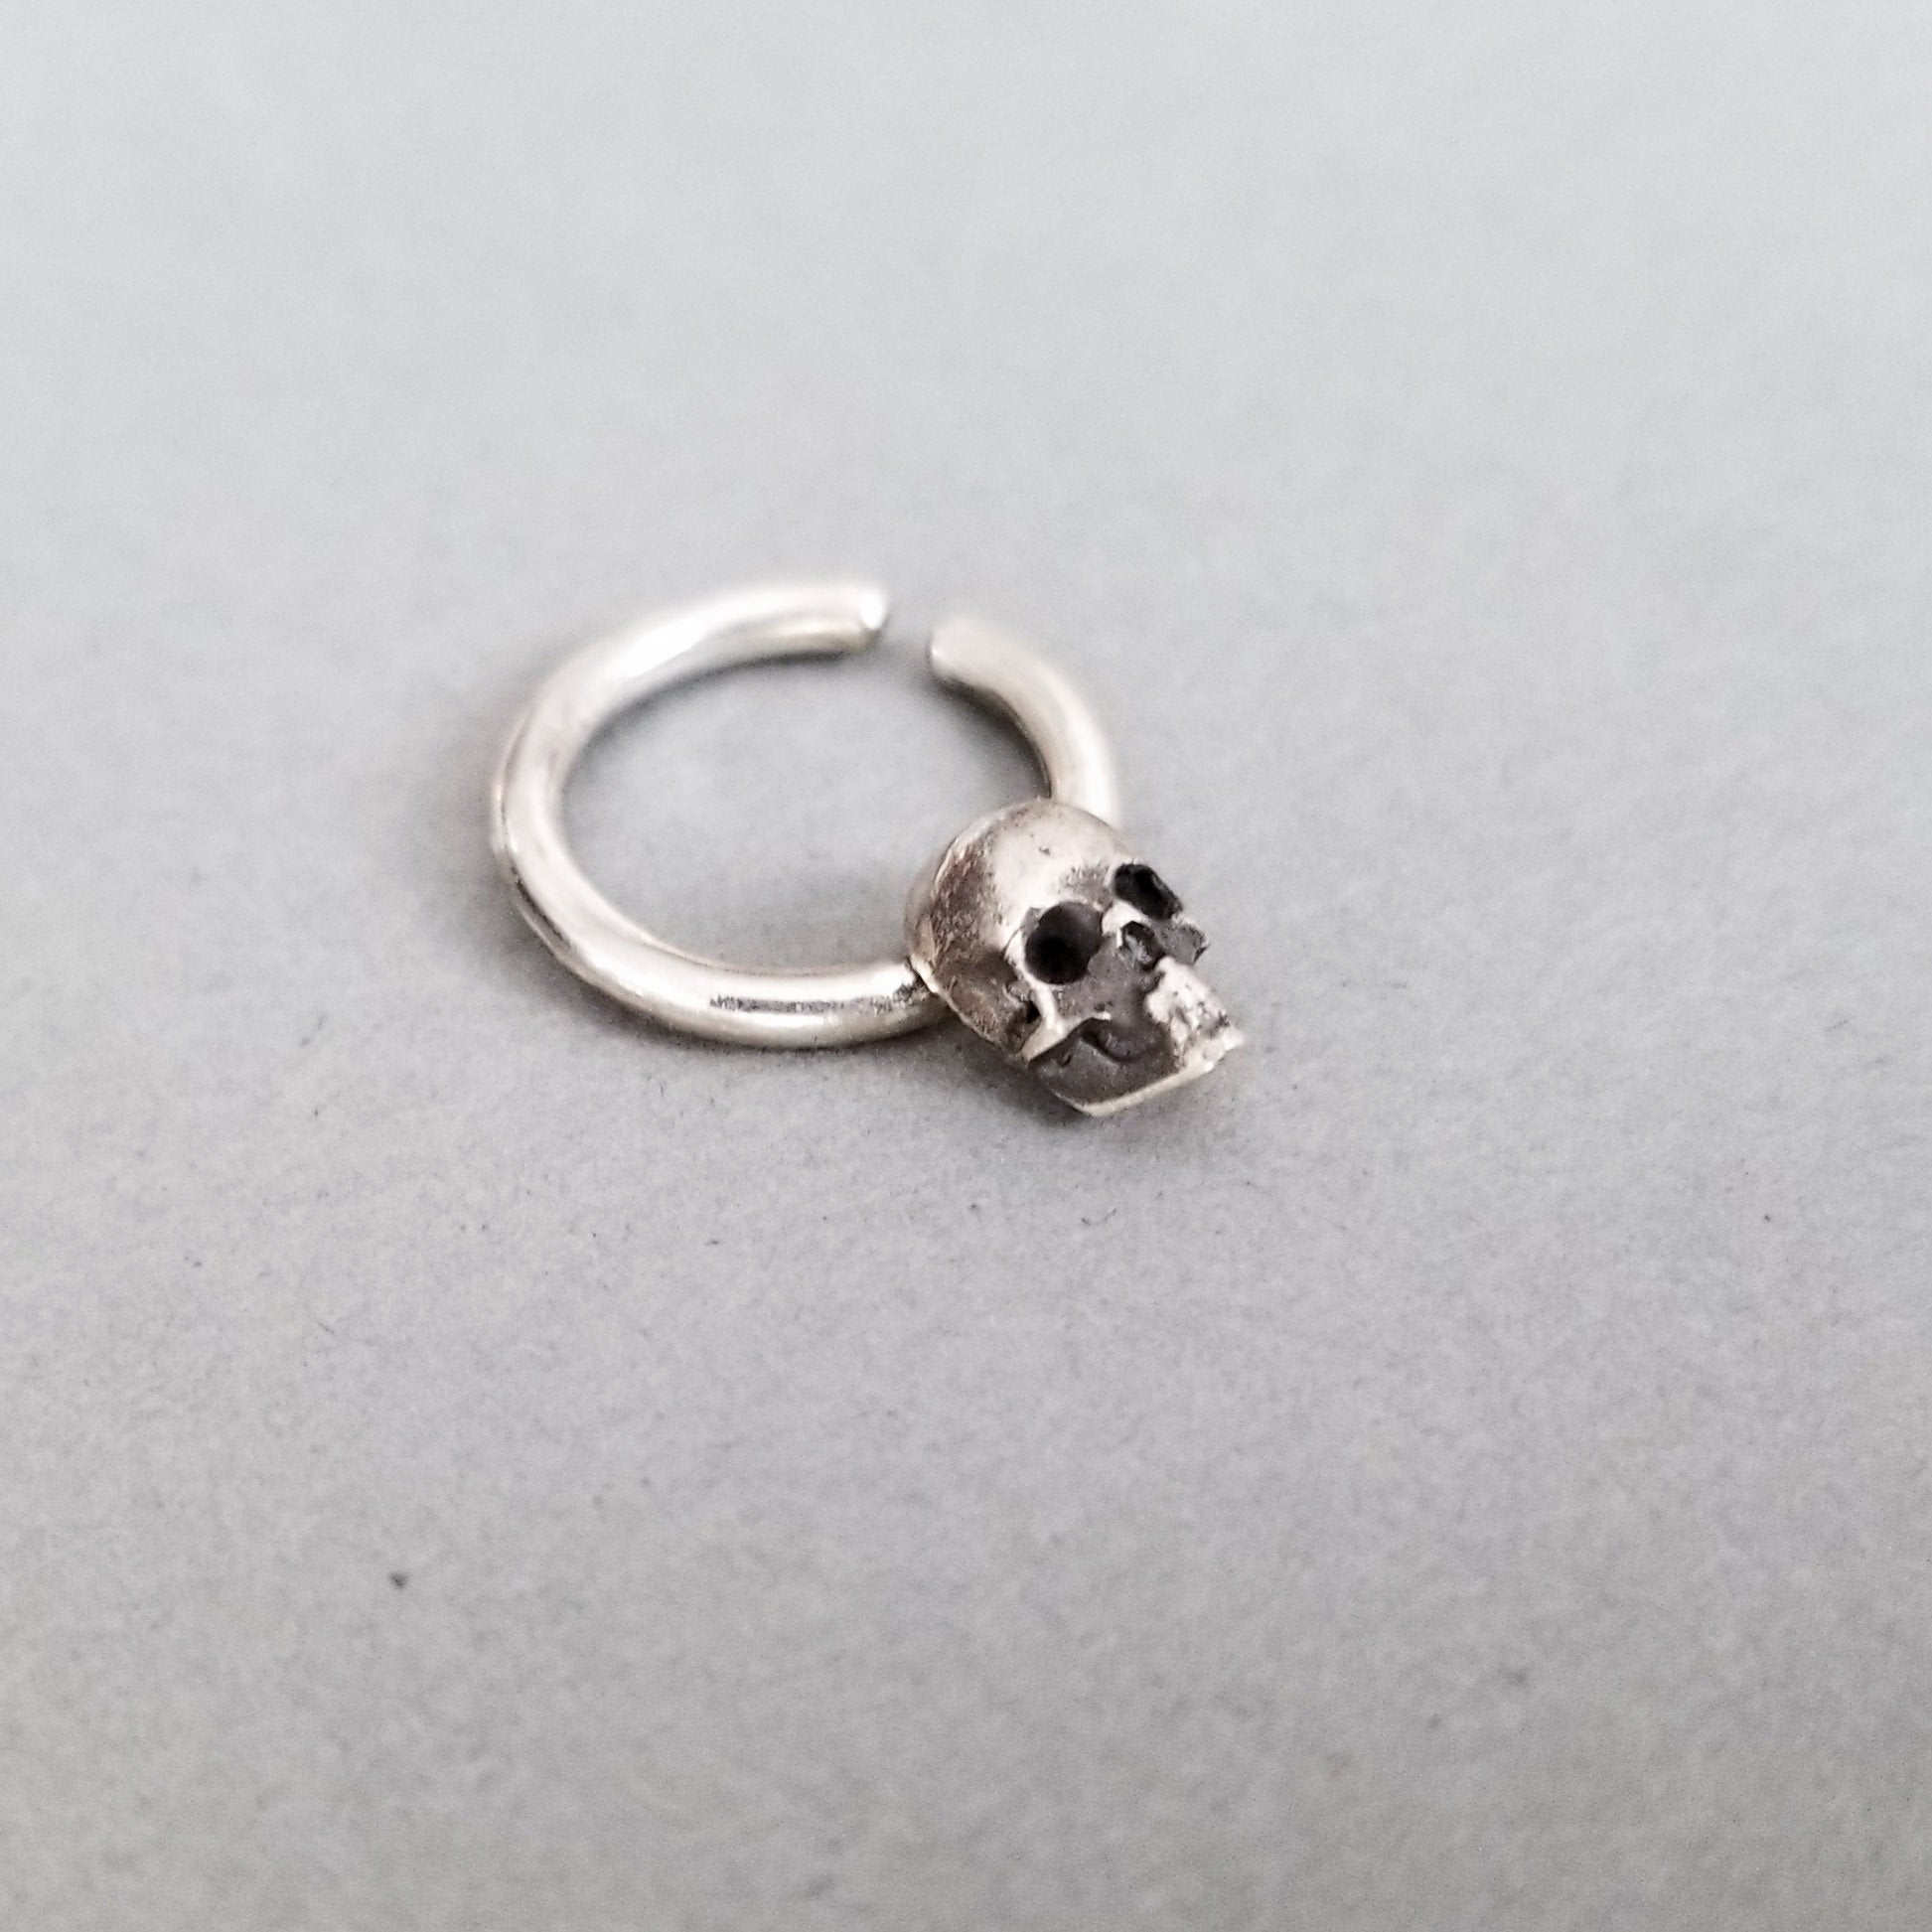 Gold Septum Clicker Ring, Nose Piercing, 18/16g Septum Jewelry, Small Septum  Ring, Dainty Nose Ring, Minimalist Nose Ring, Wide Septum Ring - Etsy | Septum  rings small, Nose piercing jewelry, Septum gold ring